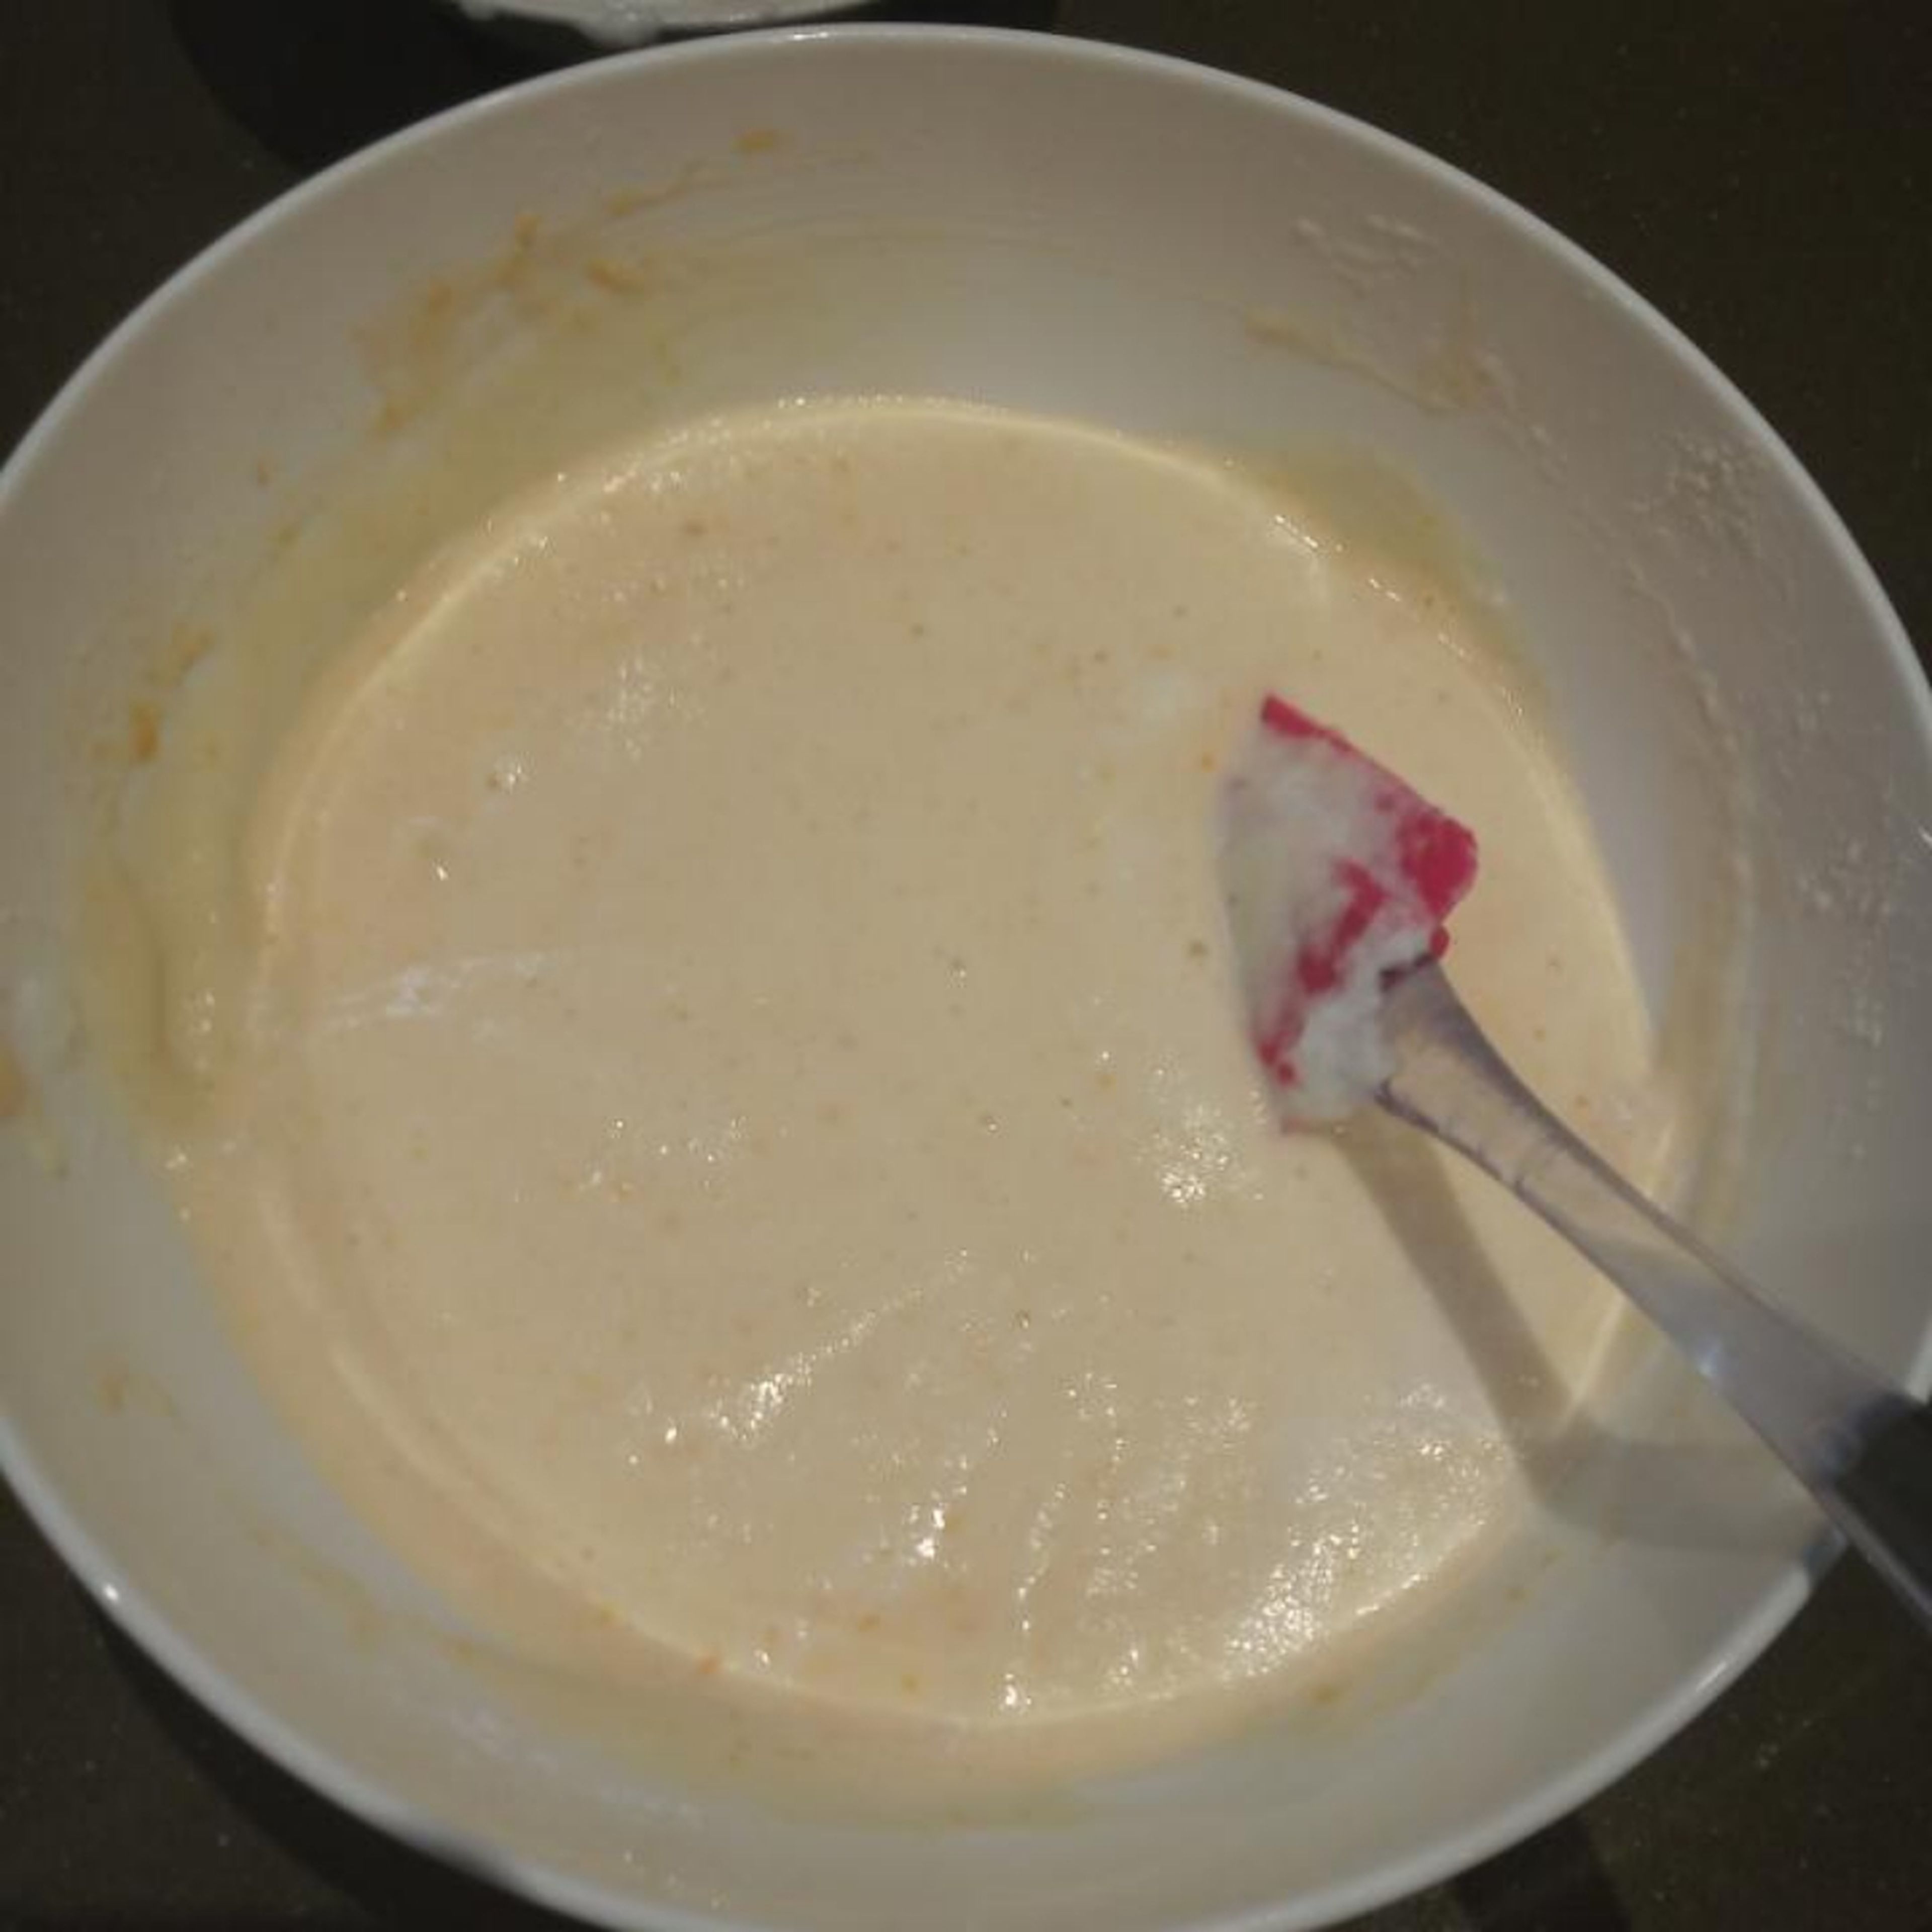 In a large bowl, beat egg whites until stiff peaks form. Fold ⅓ of the whites into the batter. Fold in remaining whites until no streaks remain.